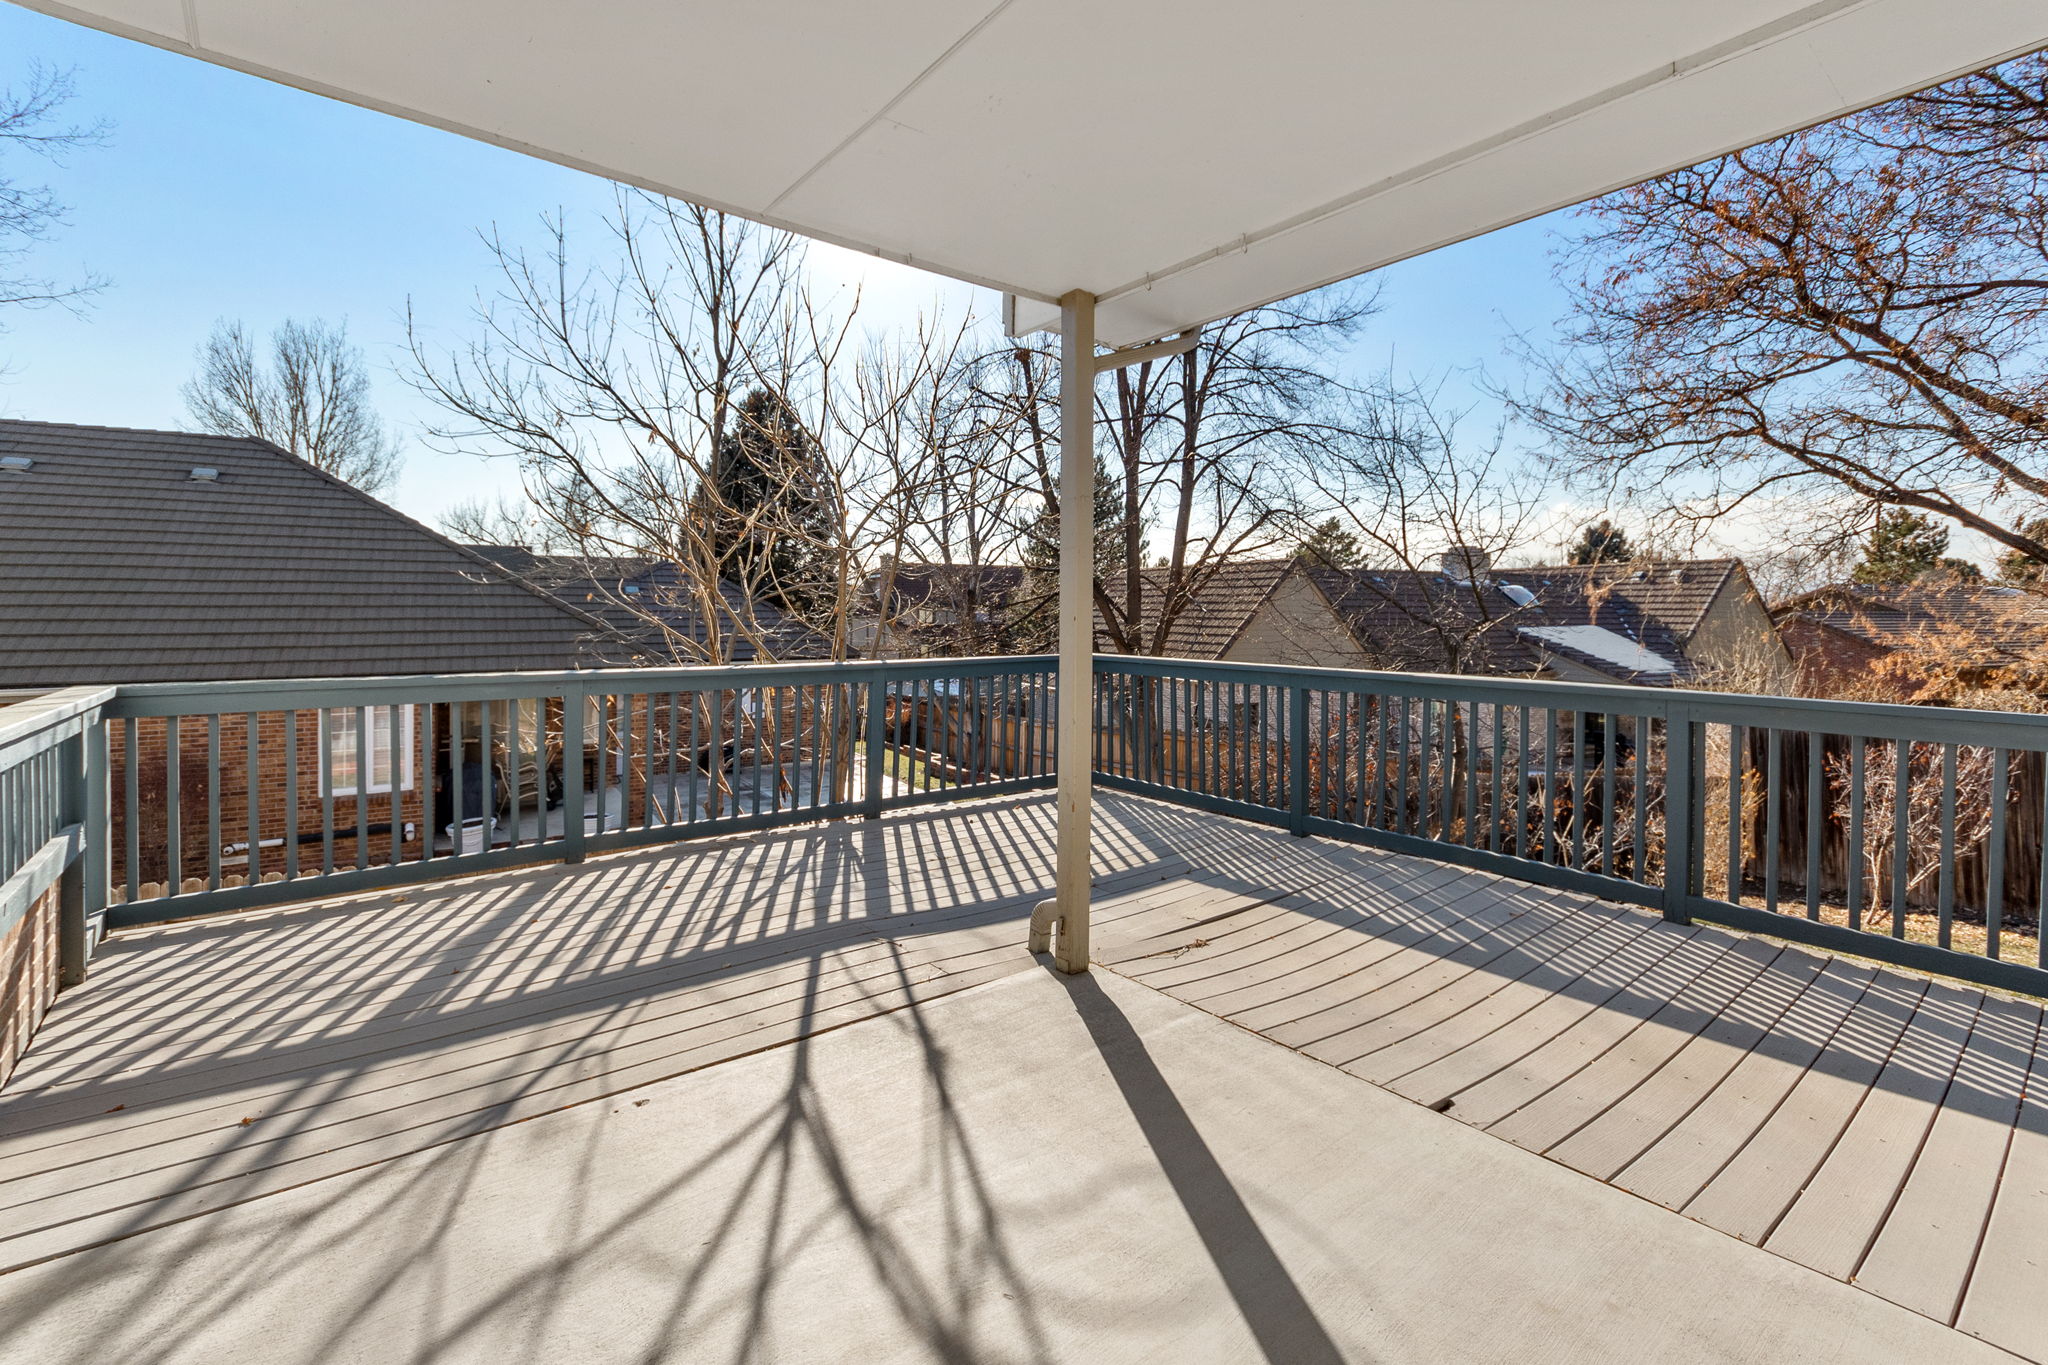  1678 W 115th Cir, Westminster, CO 80234, US Photo 35